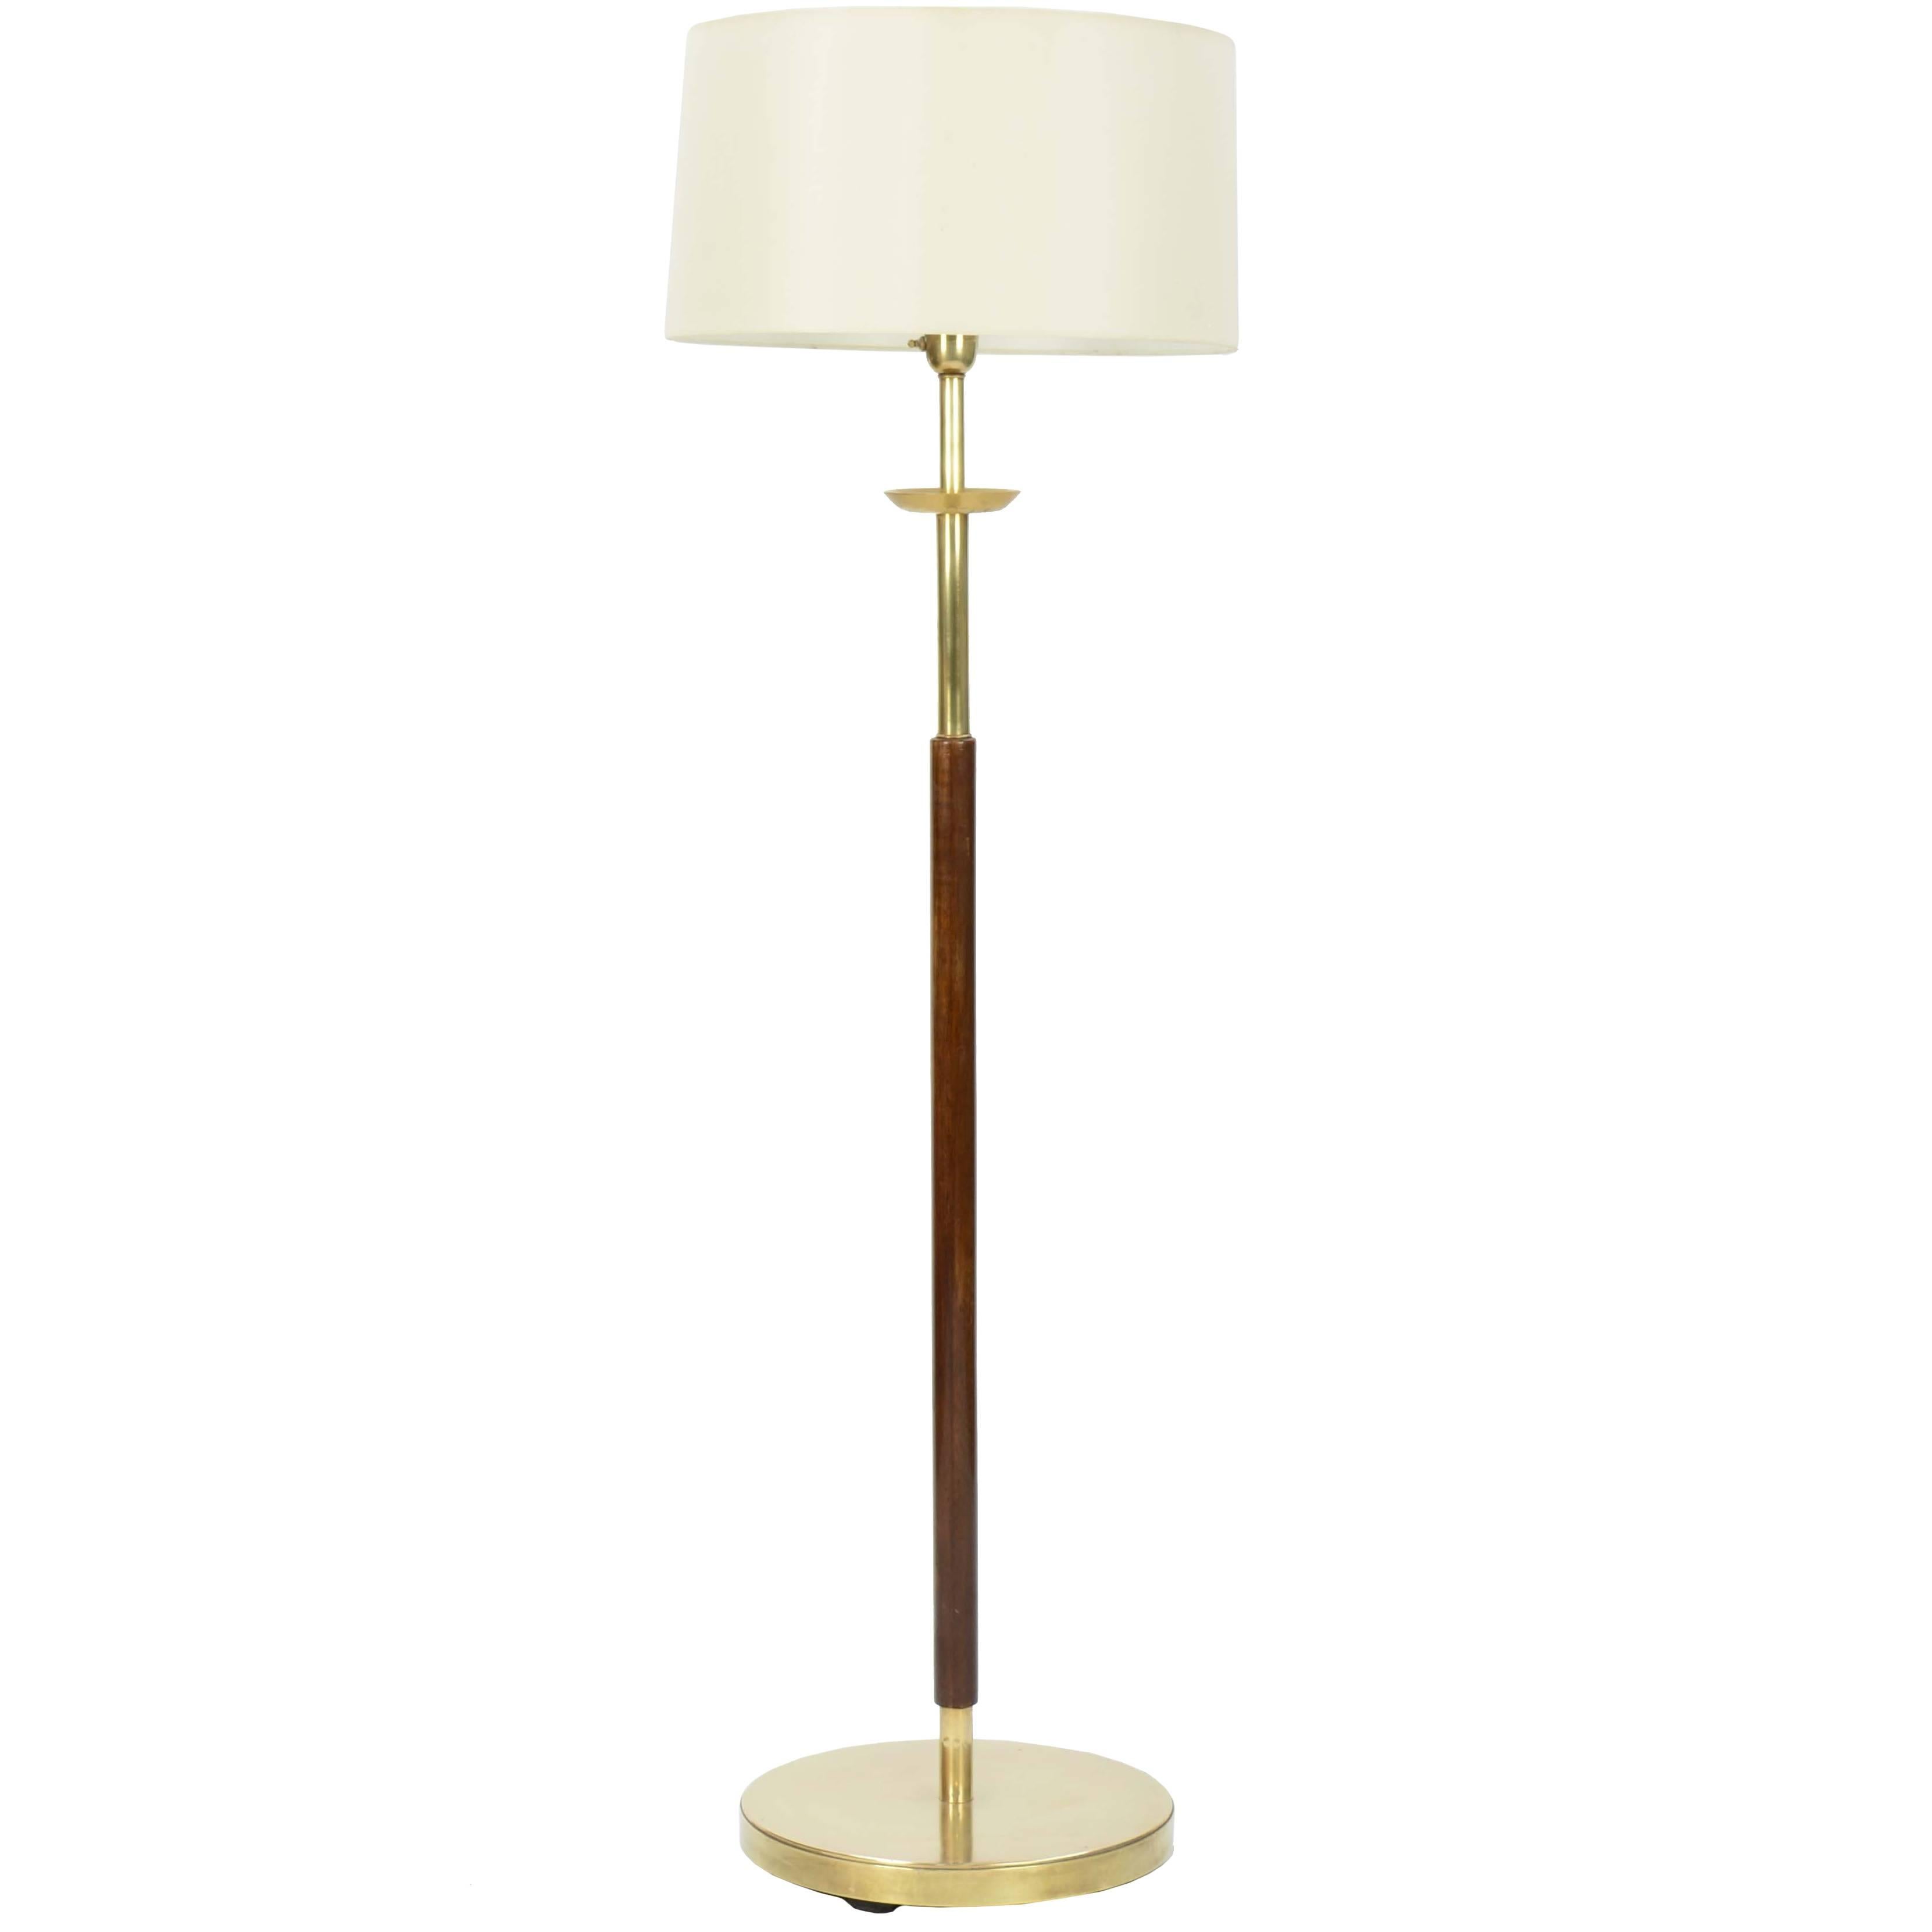 Stunning and Majestic French Modernist Floor Lamp in Brass and Walnut For Sale